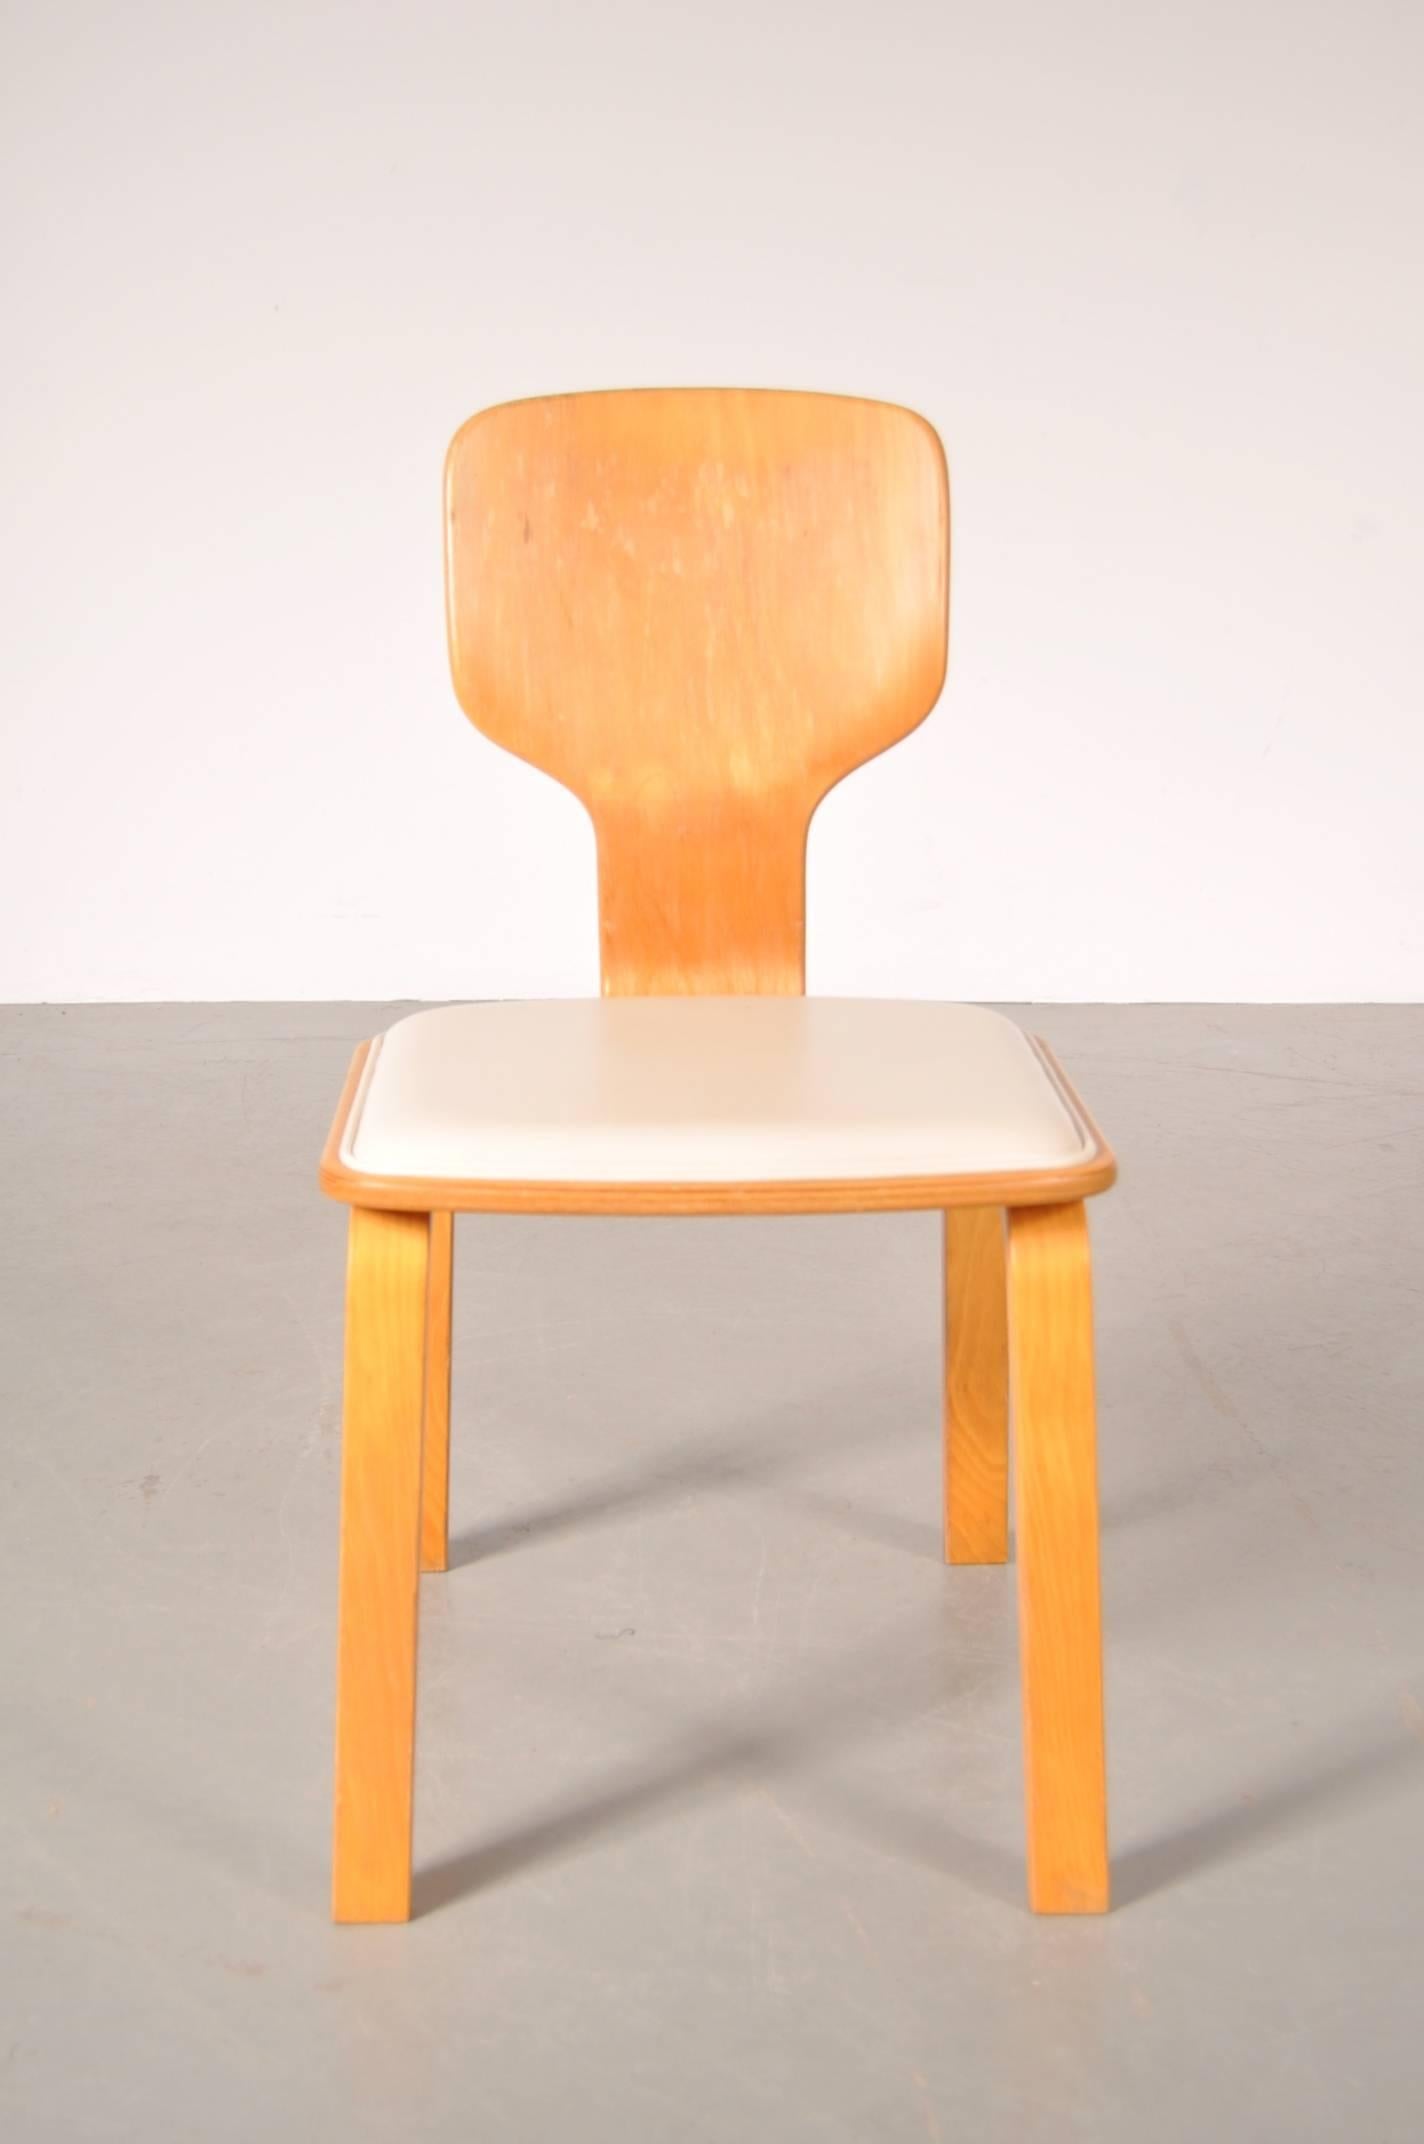 Molded Set of Four Dining Chairs Model T-0635B by Katsuo Matsumura for Tendo, Japan